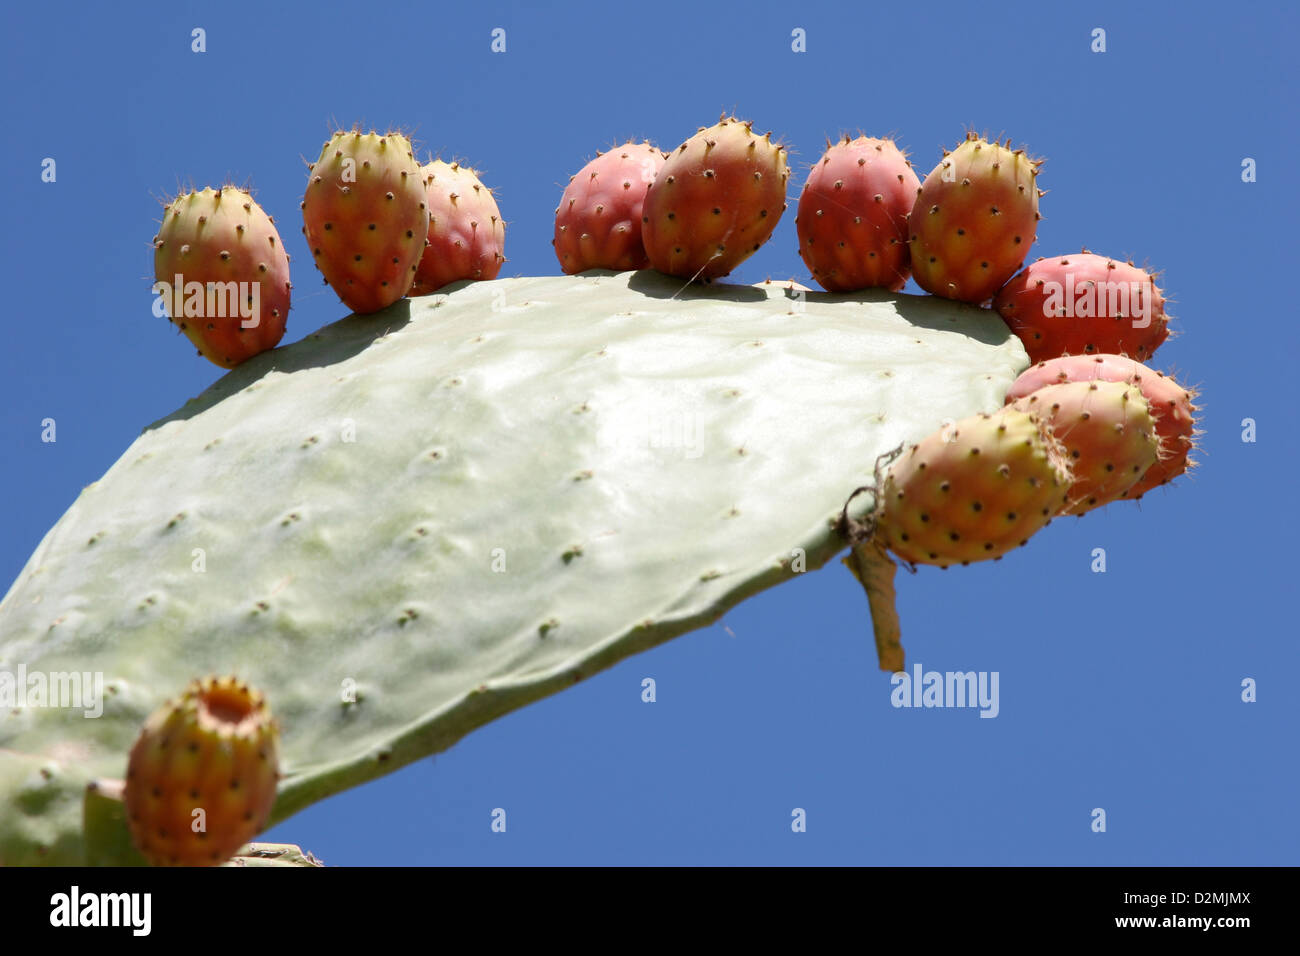 A row of Ripe prickly pears on a cactus leaf against a blue sky Stock Photo